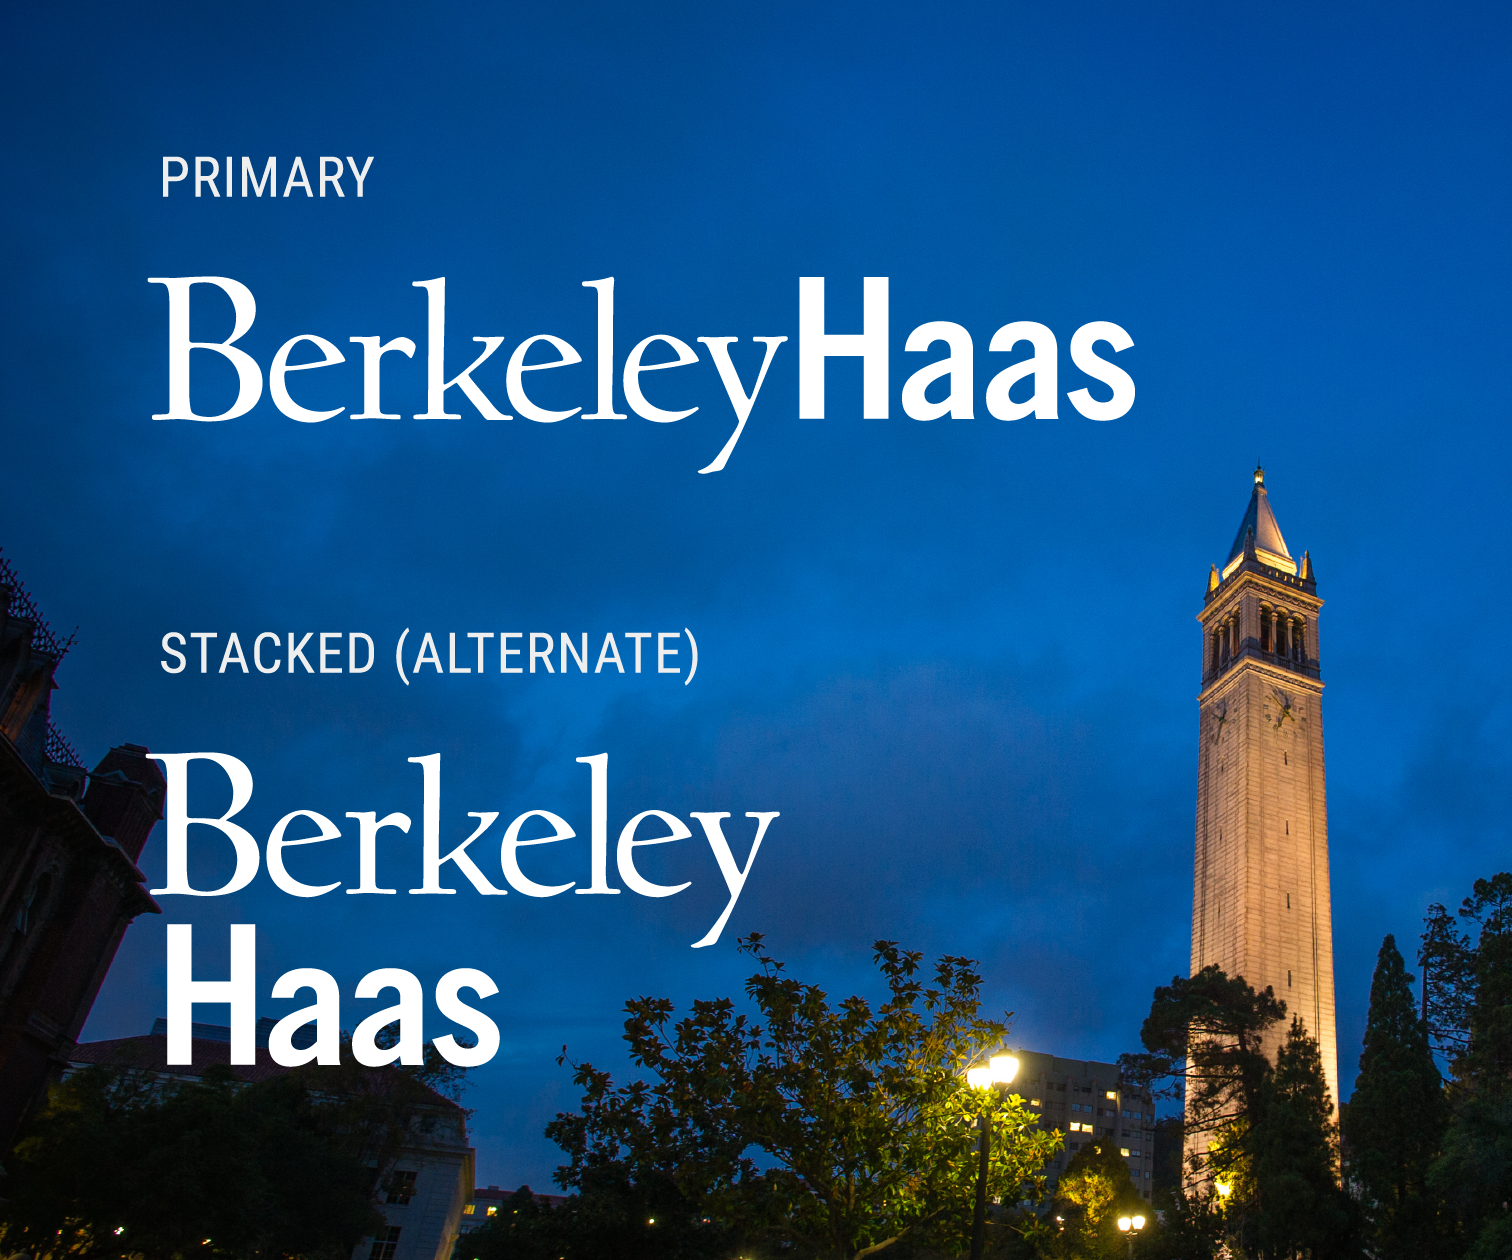 primary and stacked (alternate) versions of the Berkeley Haas wordmark in white on a photo of the Campanile at night